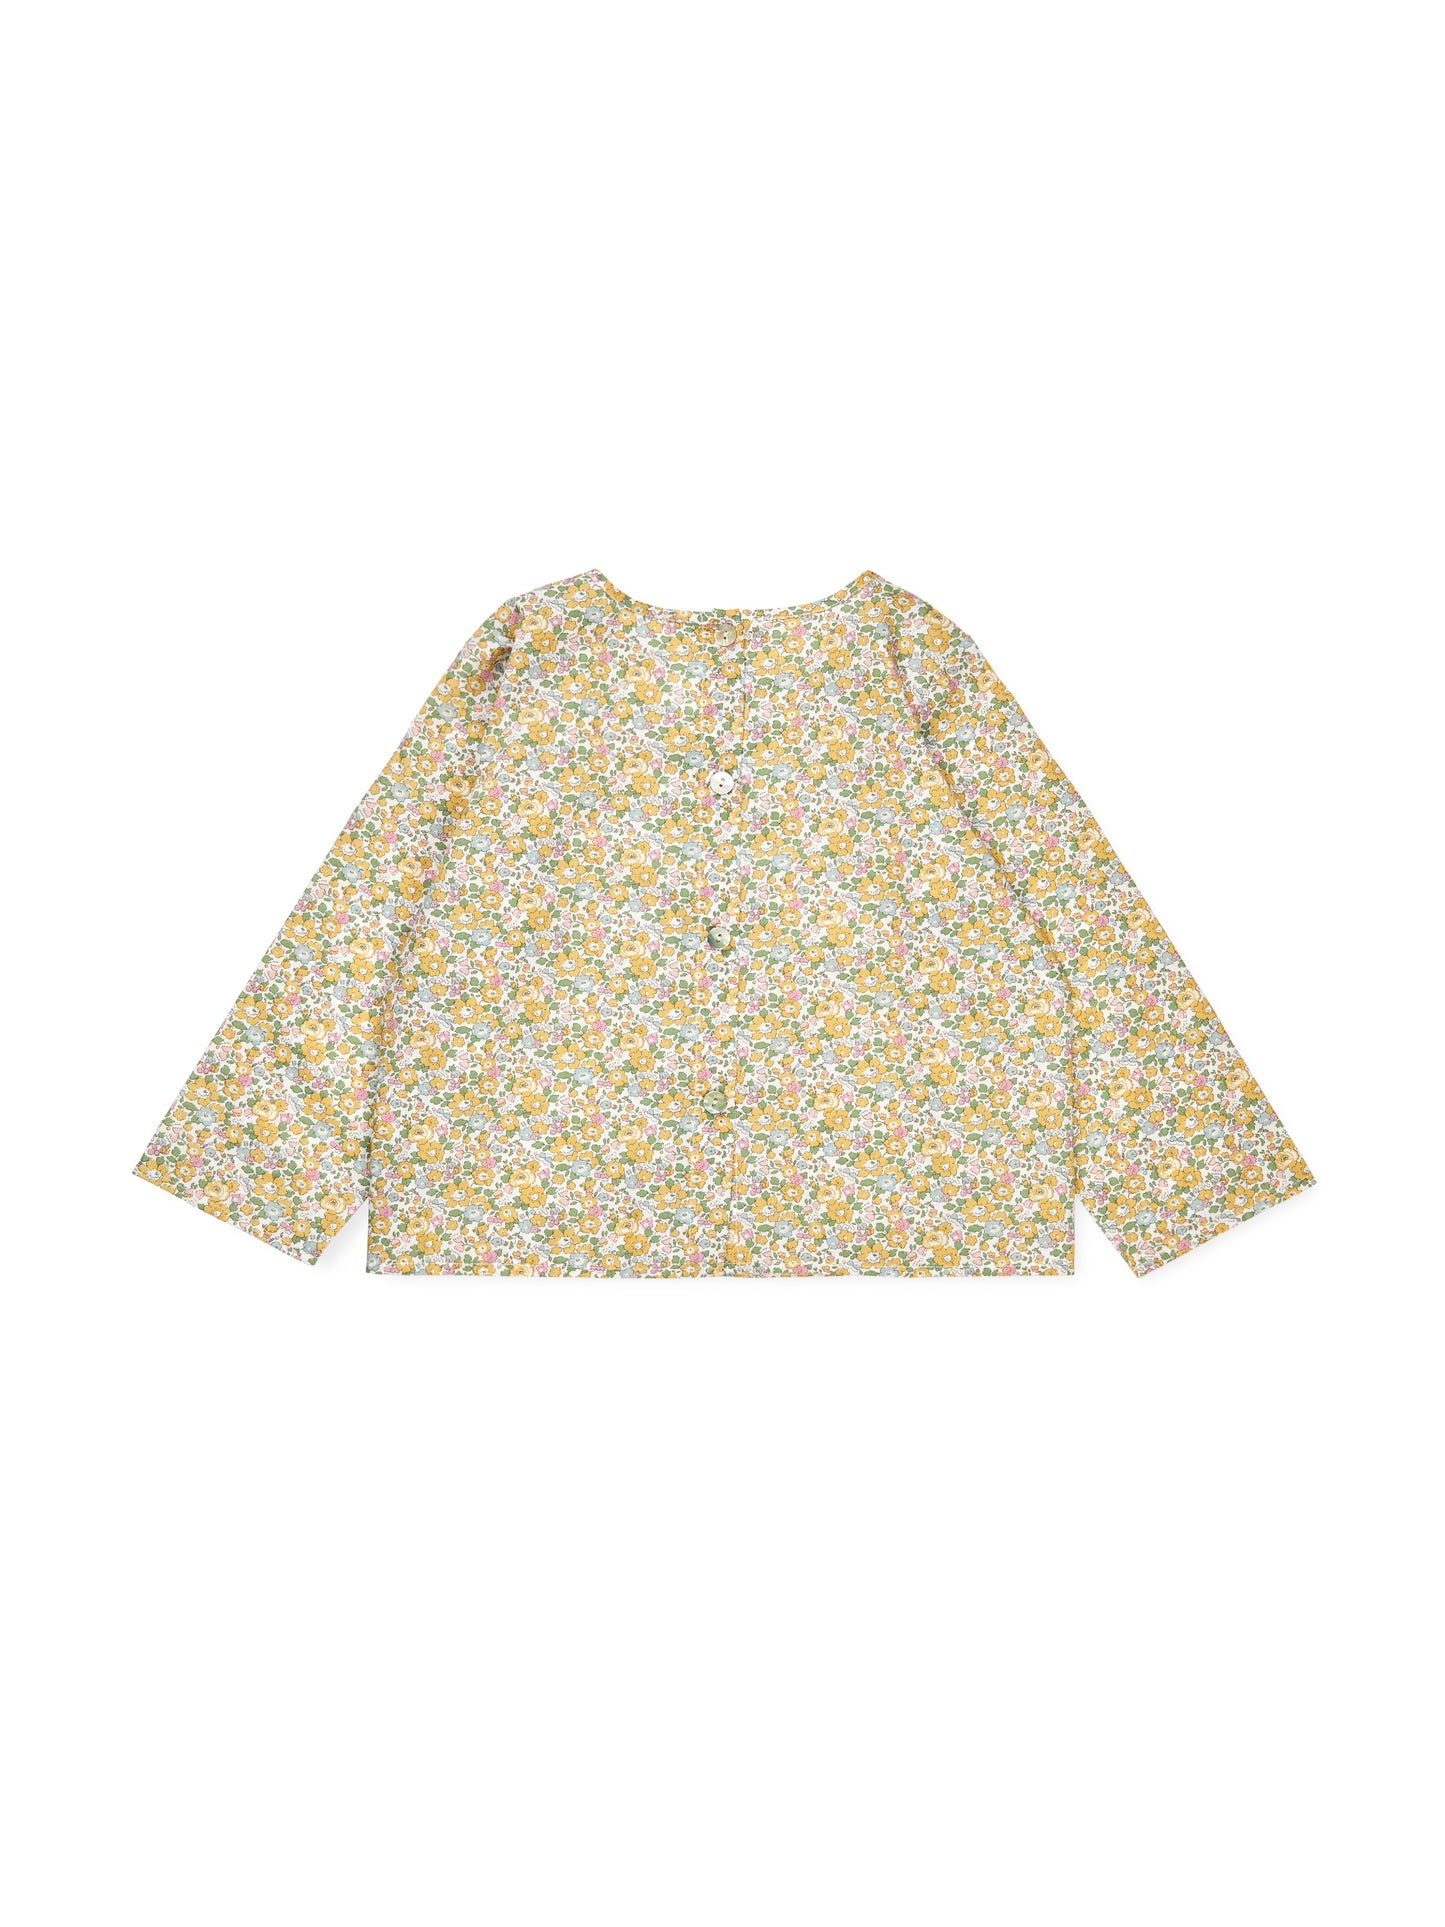 Lalaby - Holly top - Liberty Betsy Ann